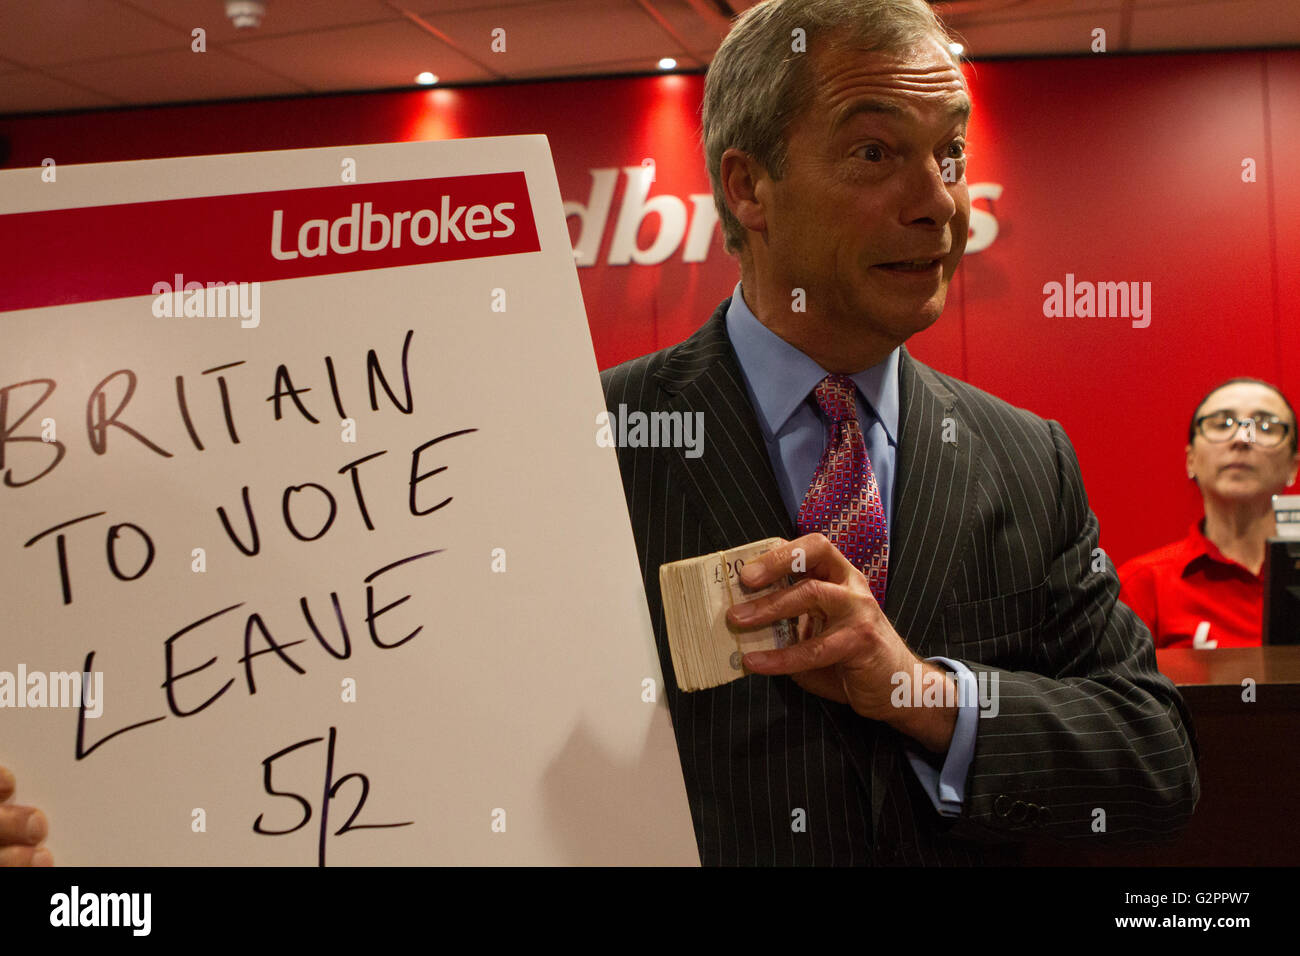 London, England. 2nd June 2016. UKIP leader Nigel Farage places his bet on Britain to leave the EU in Ladbrokes in London, England. Brayan Alexander Lopez Garzon/Alamy Lives News Stock Photo